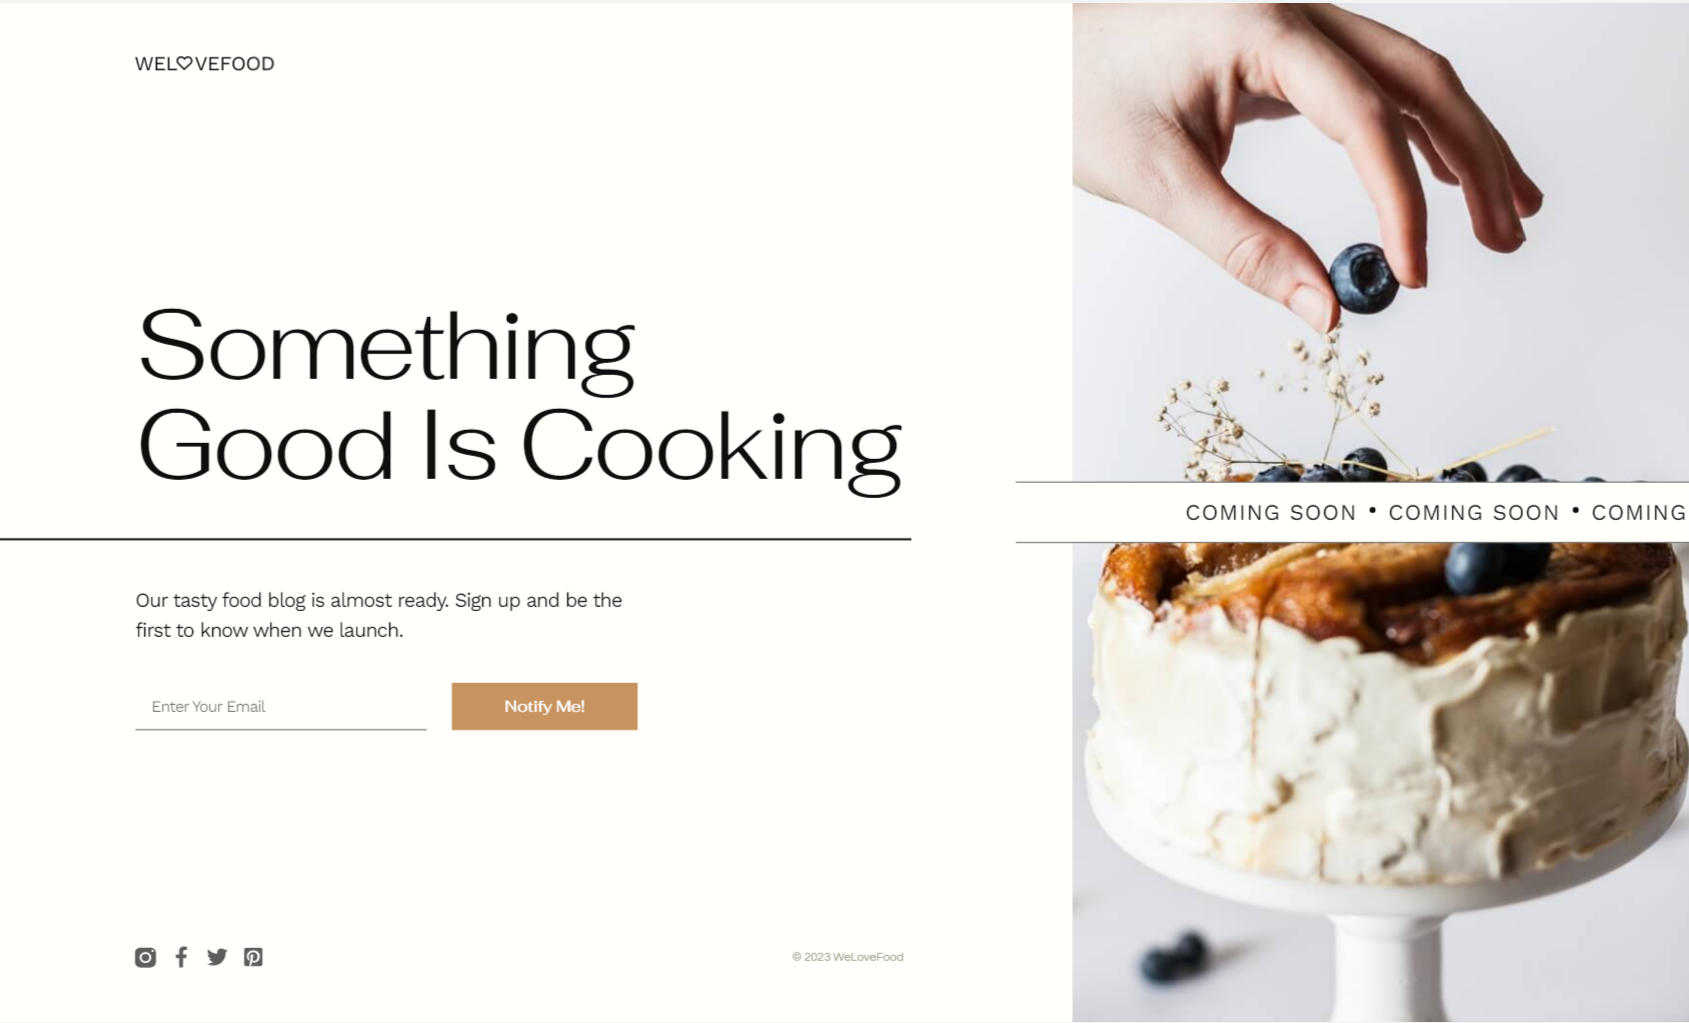 Coming soon template for a cooking blog